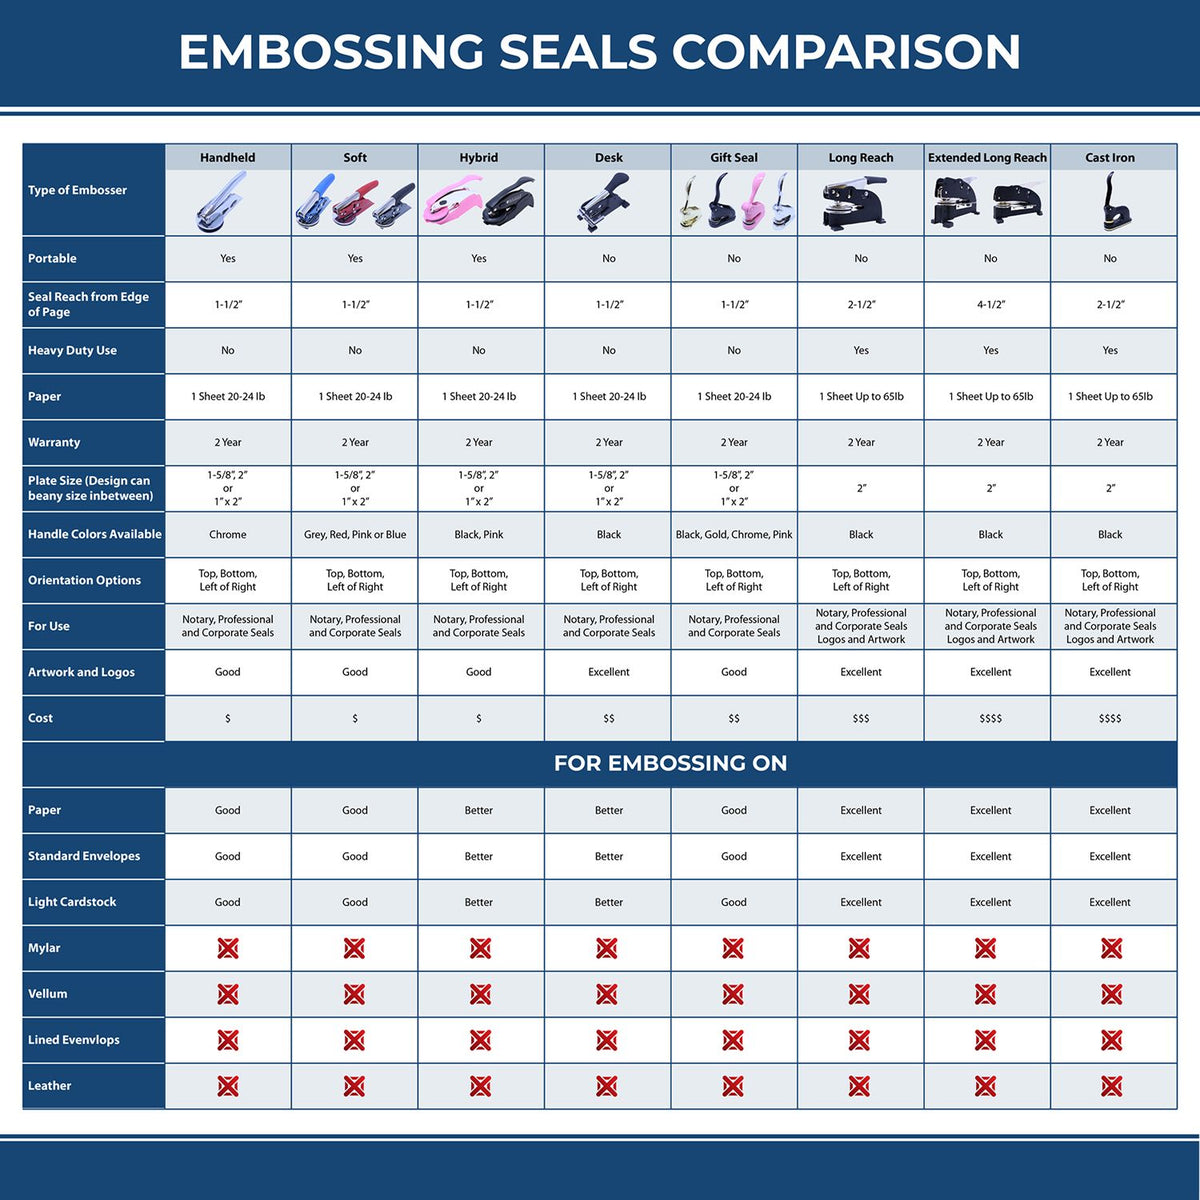 A comparison chart for the different types of mount models available for the Hybrid Alabama Engineer Seal